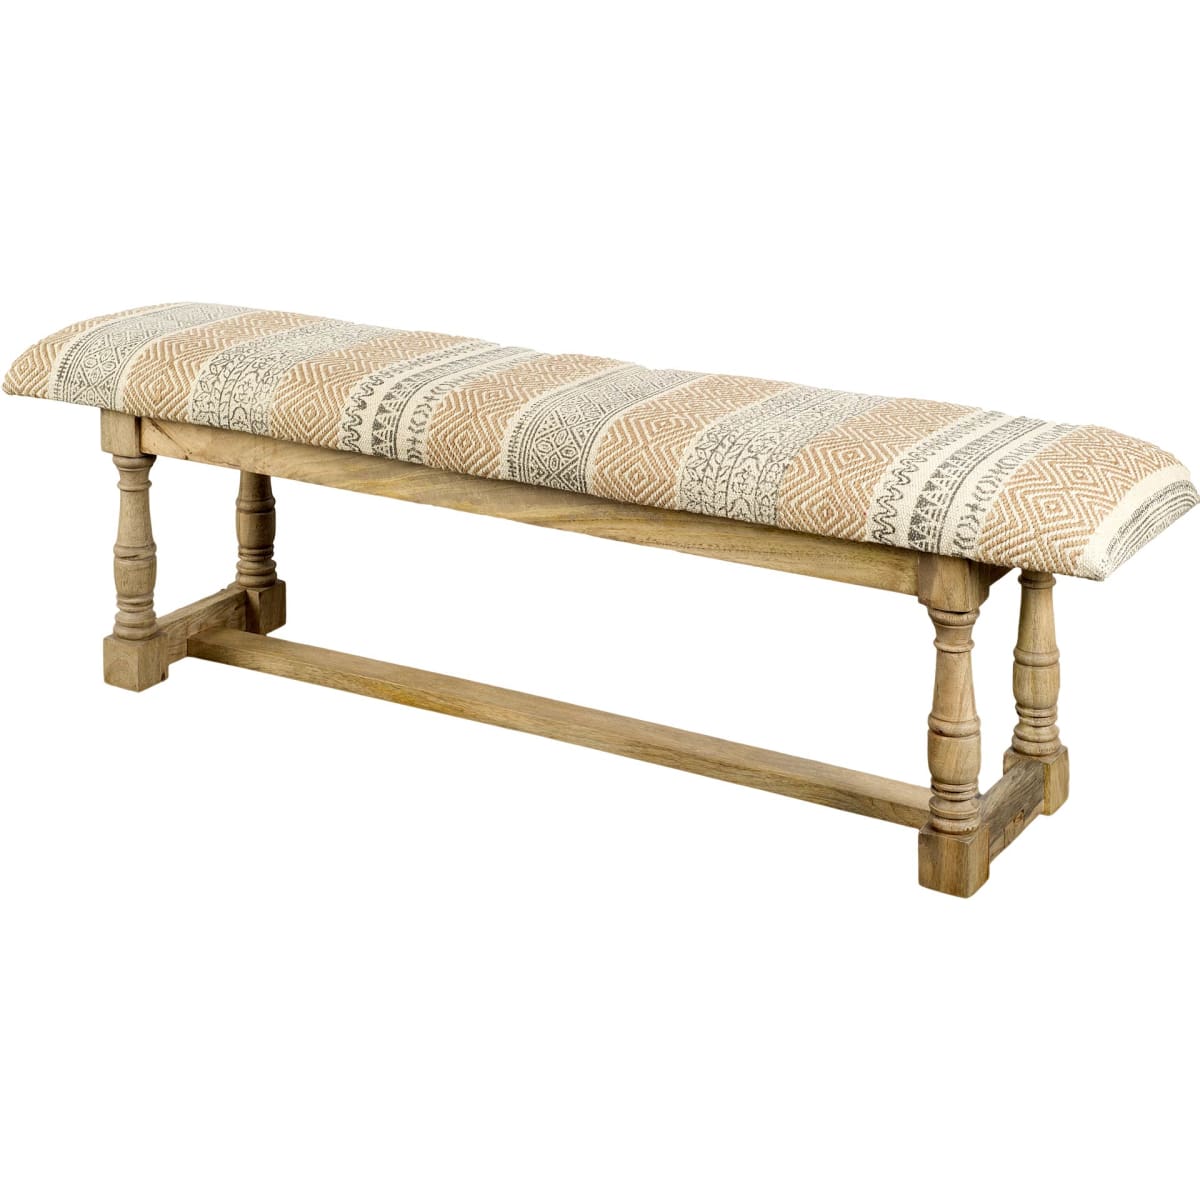 Greenfield Bench Tan Fabric | Brown Wood - benches